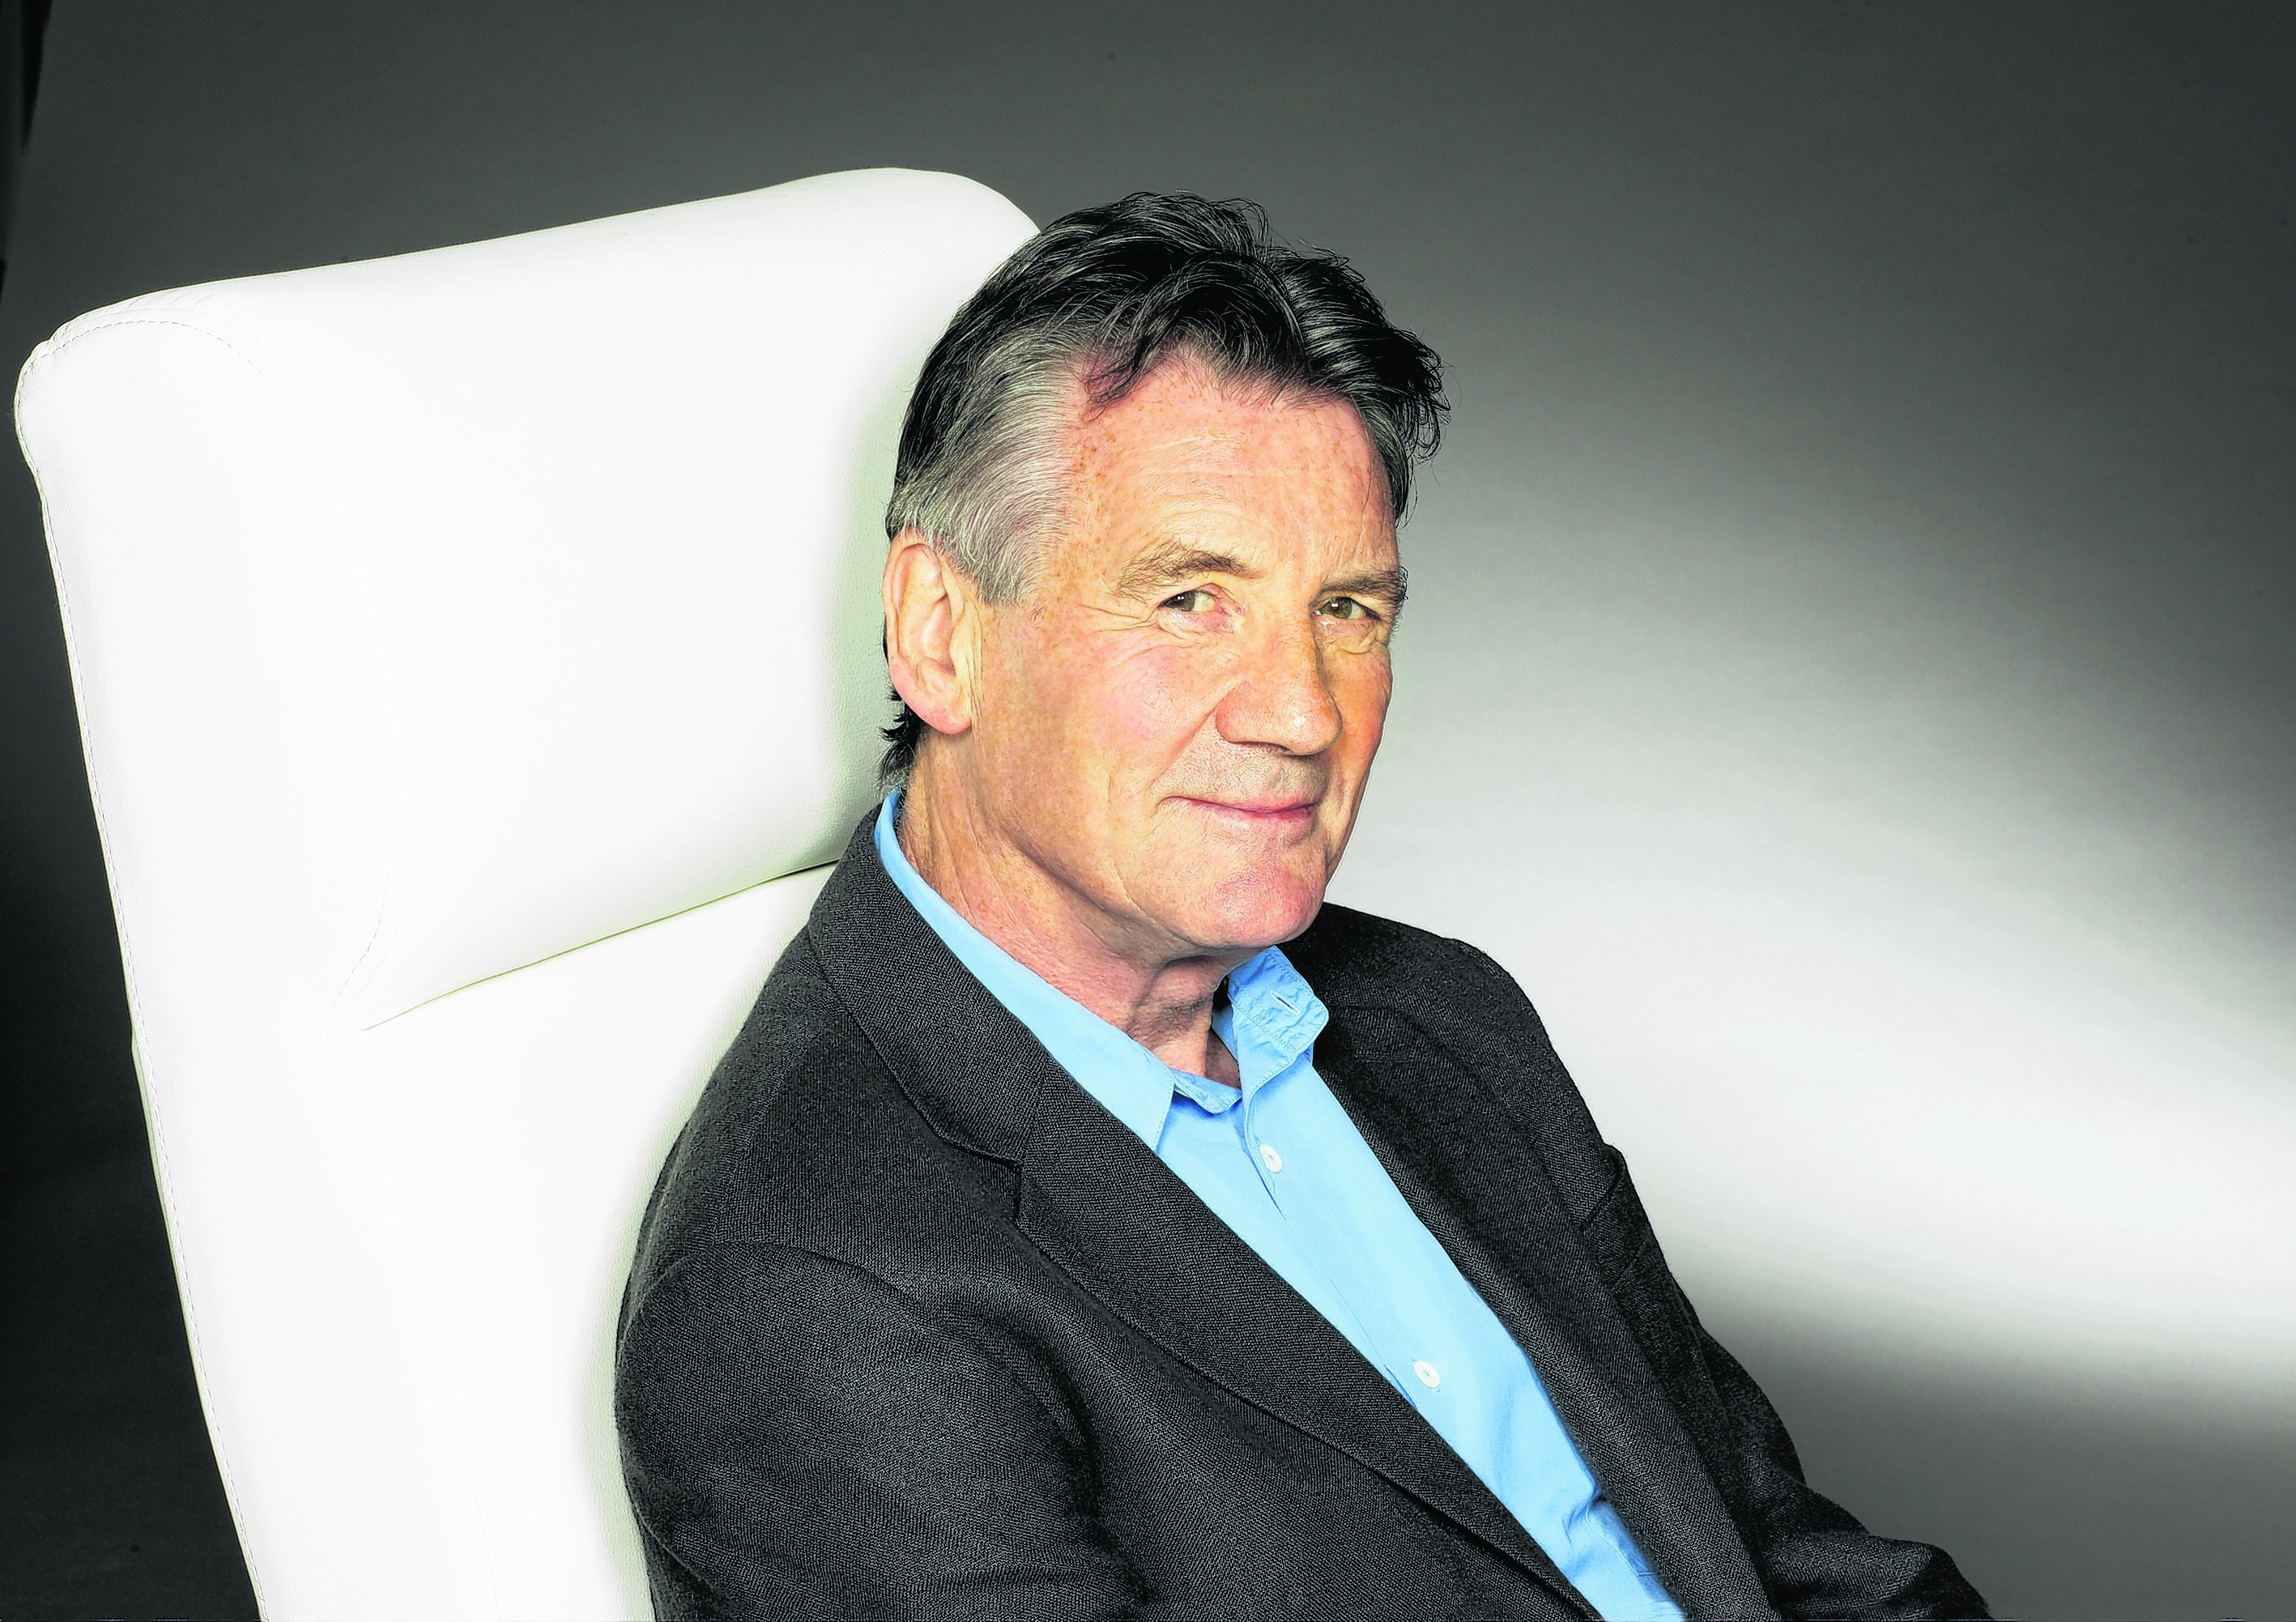 Sir Michael Palin has donated badges to Explorer scouts on Orkney.